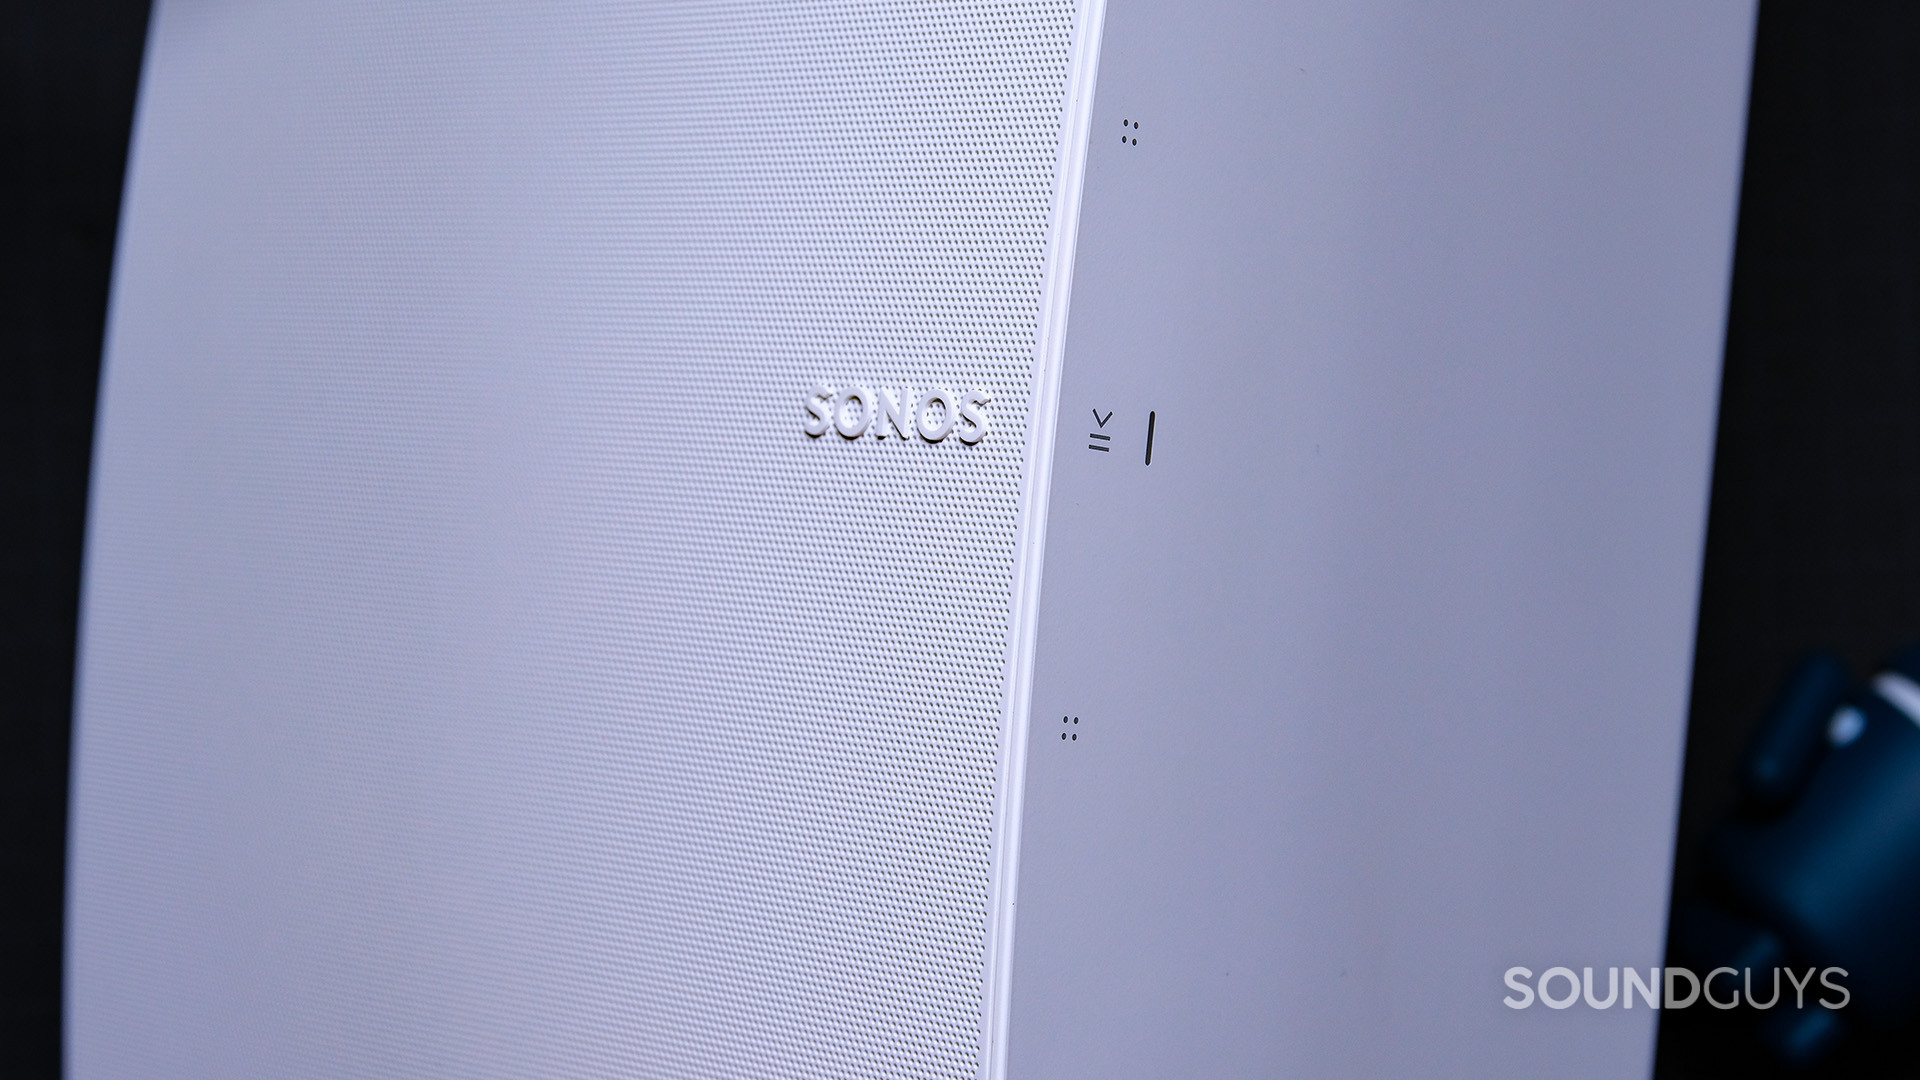 A white Sonos Five speaker showing a close-up of the Sonos logo and the contrl buttons. The speaker is oriented vertically.